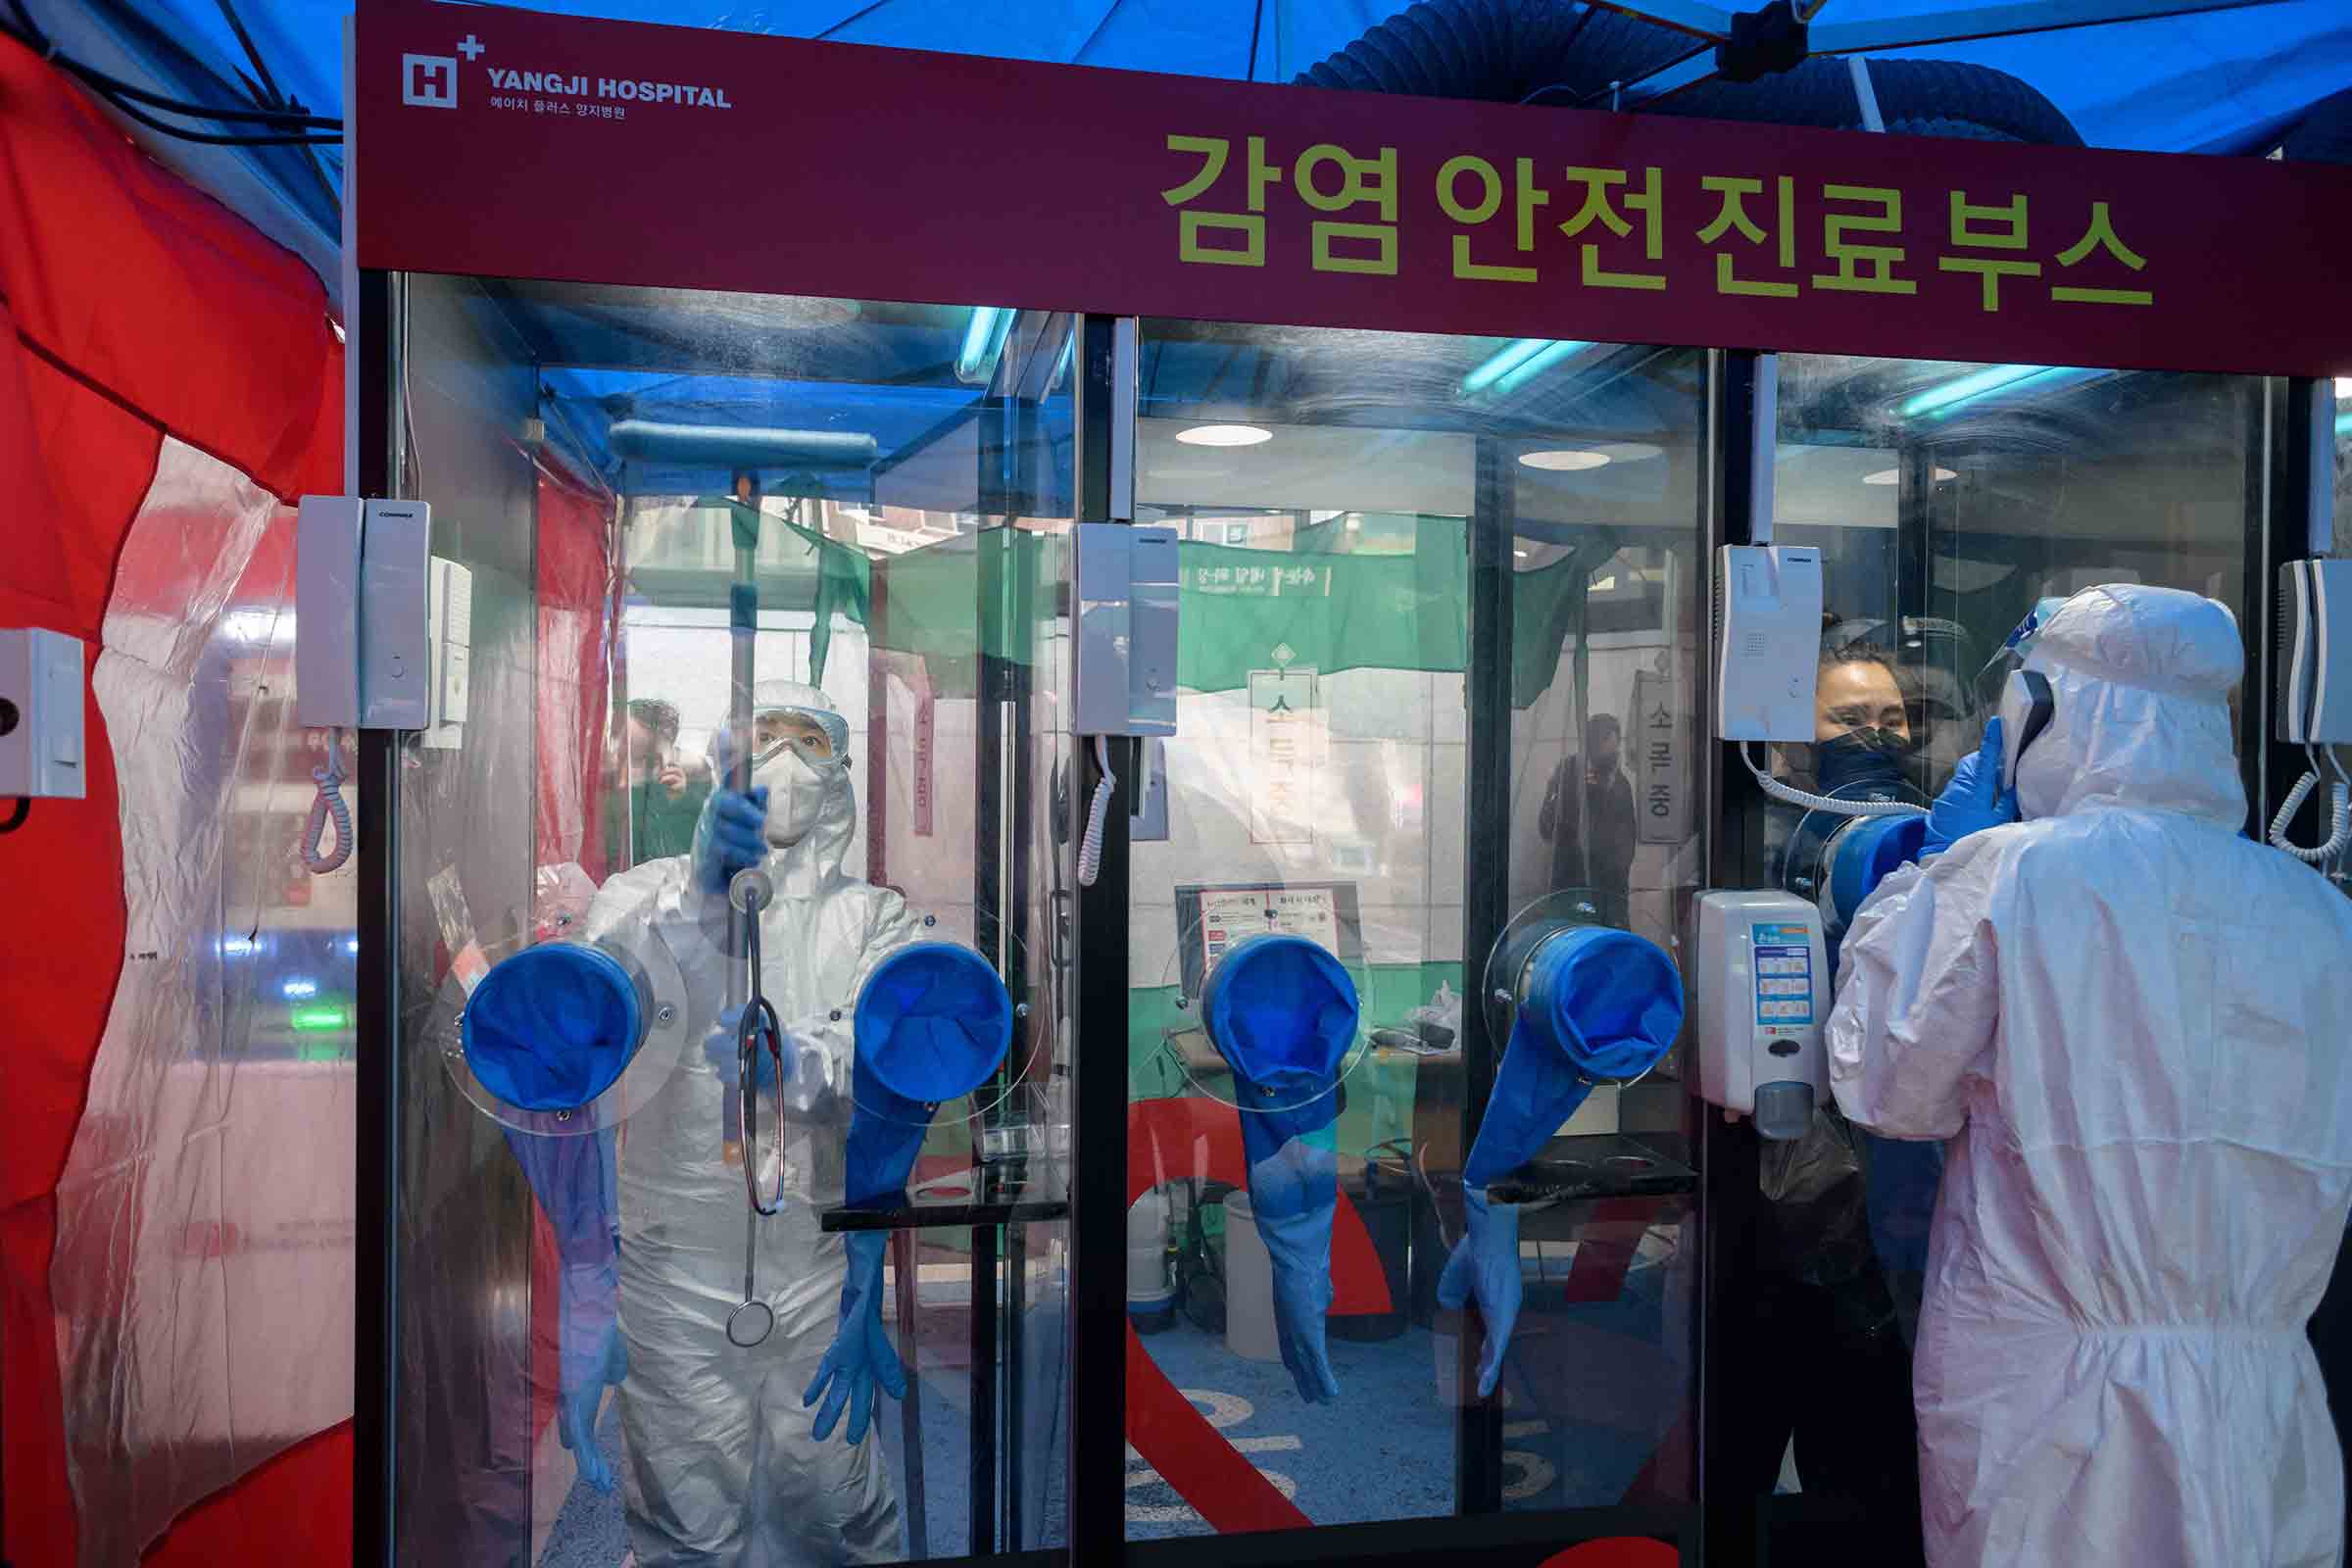 A woman consults a nurse at a walk-up COVID-19 testing booth outside Yangji Hospital in Seoul (Ed Jones—AFP/Getty Images)